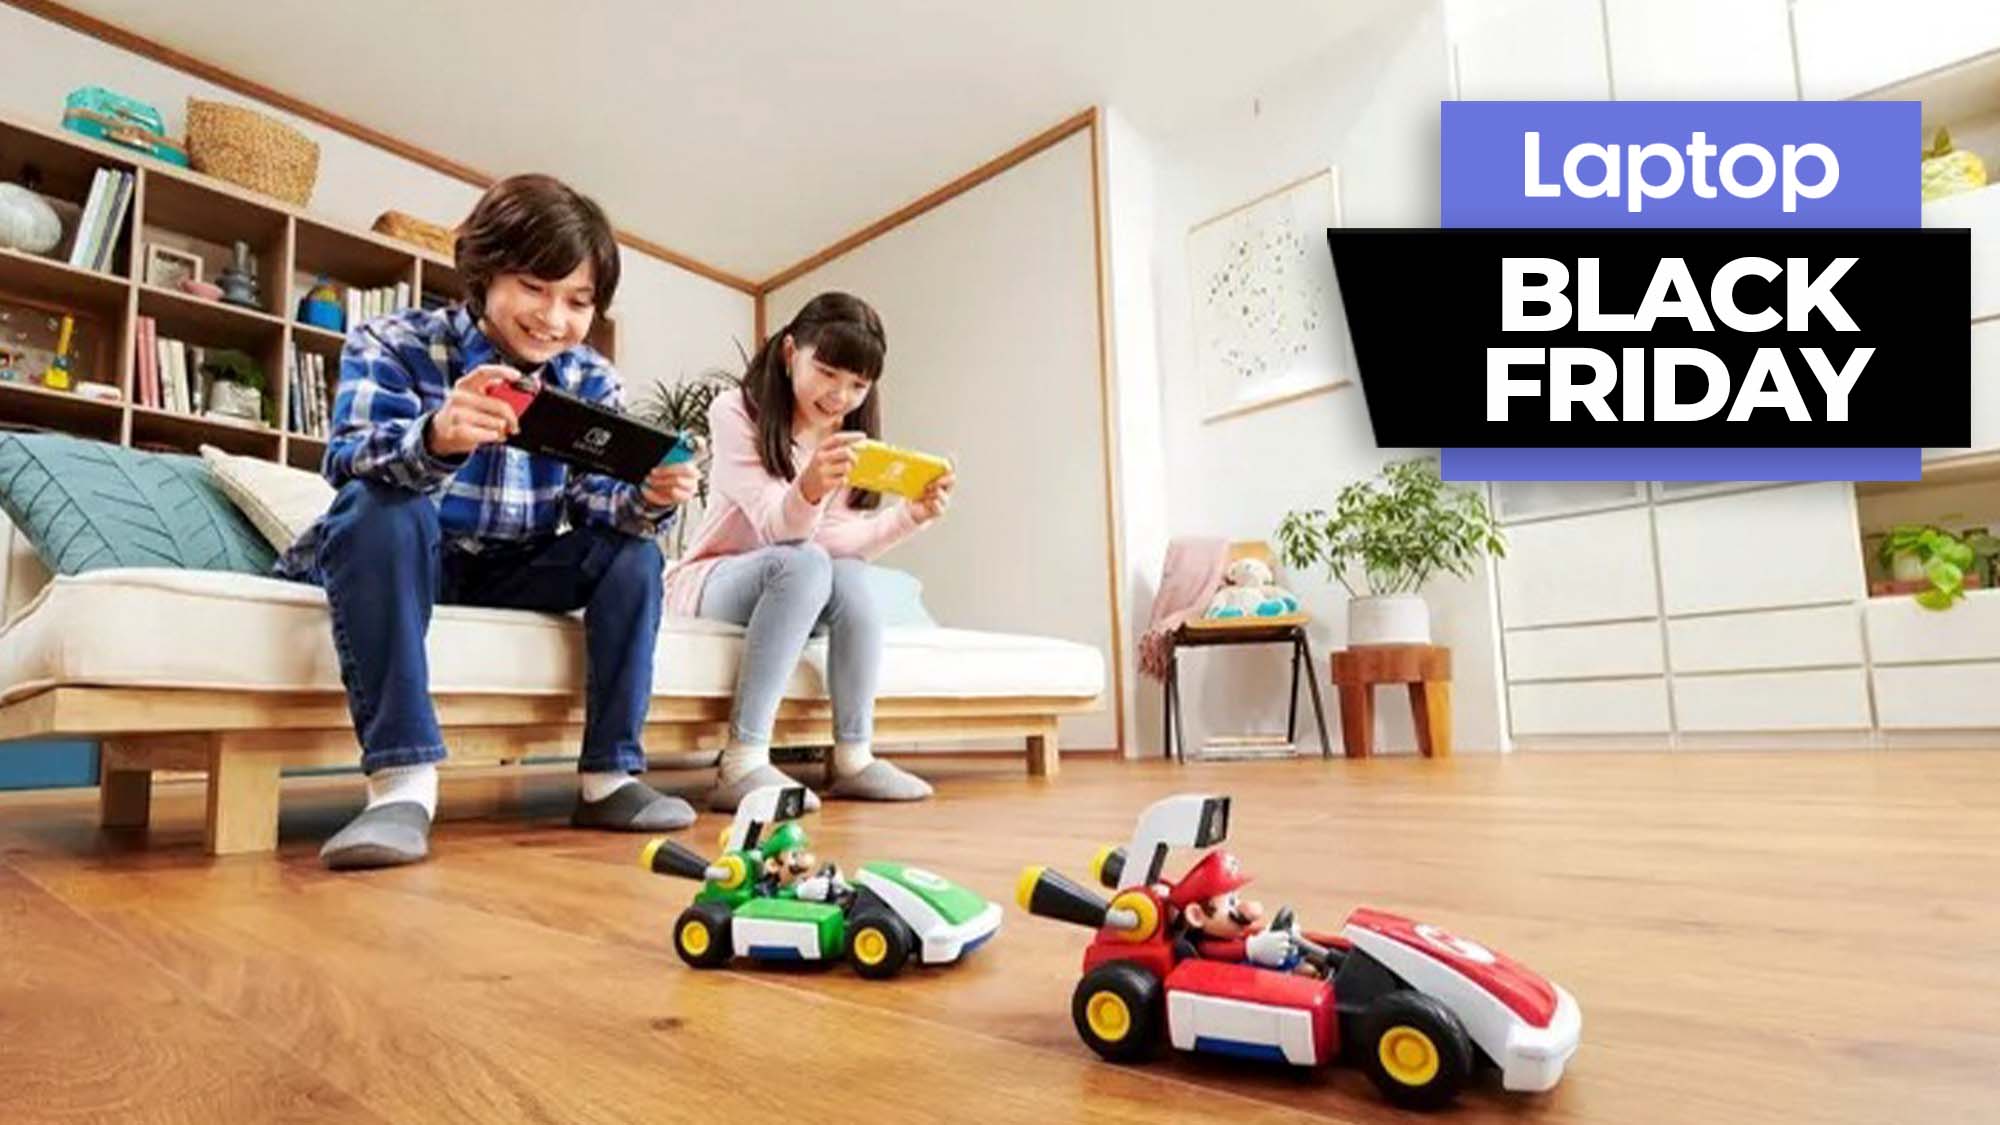 Mario Kart Live Mario and Luigi R/C vehicles driving on a wood floor in front of a boy and a girl controlling them from their Nintendo Switch and Switch Lite on a couch